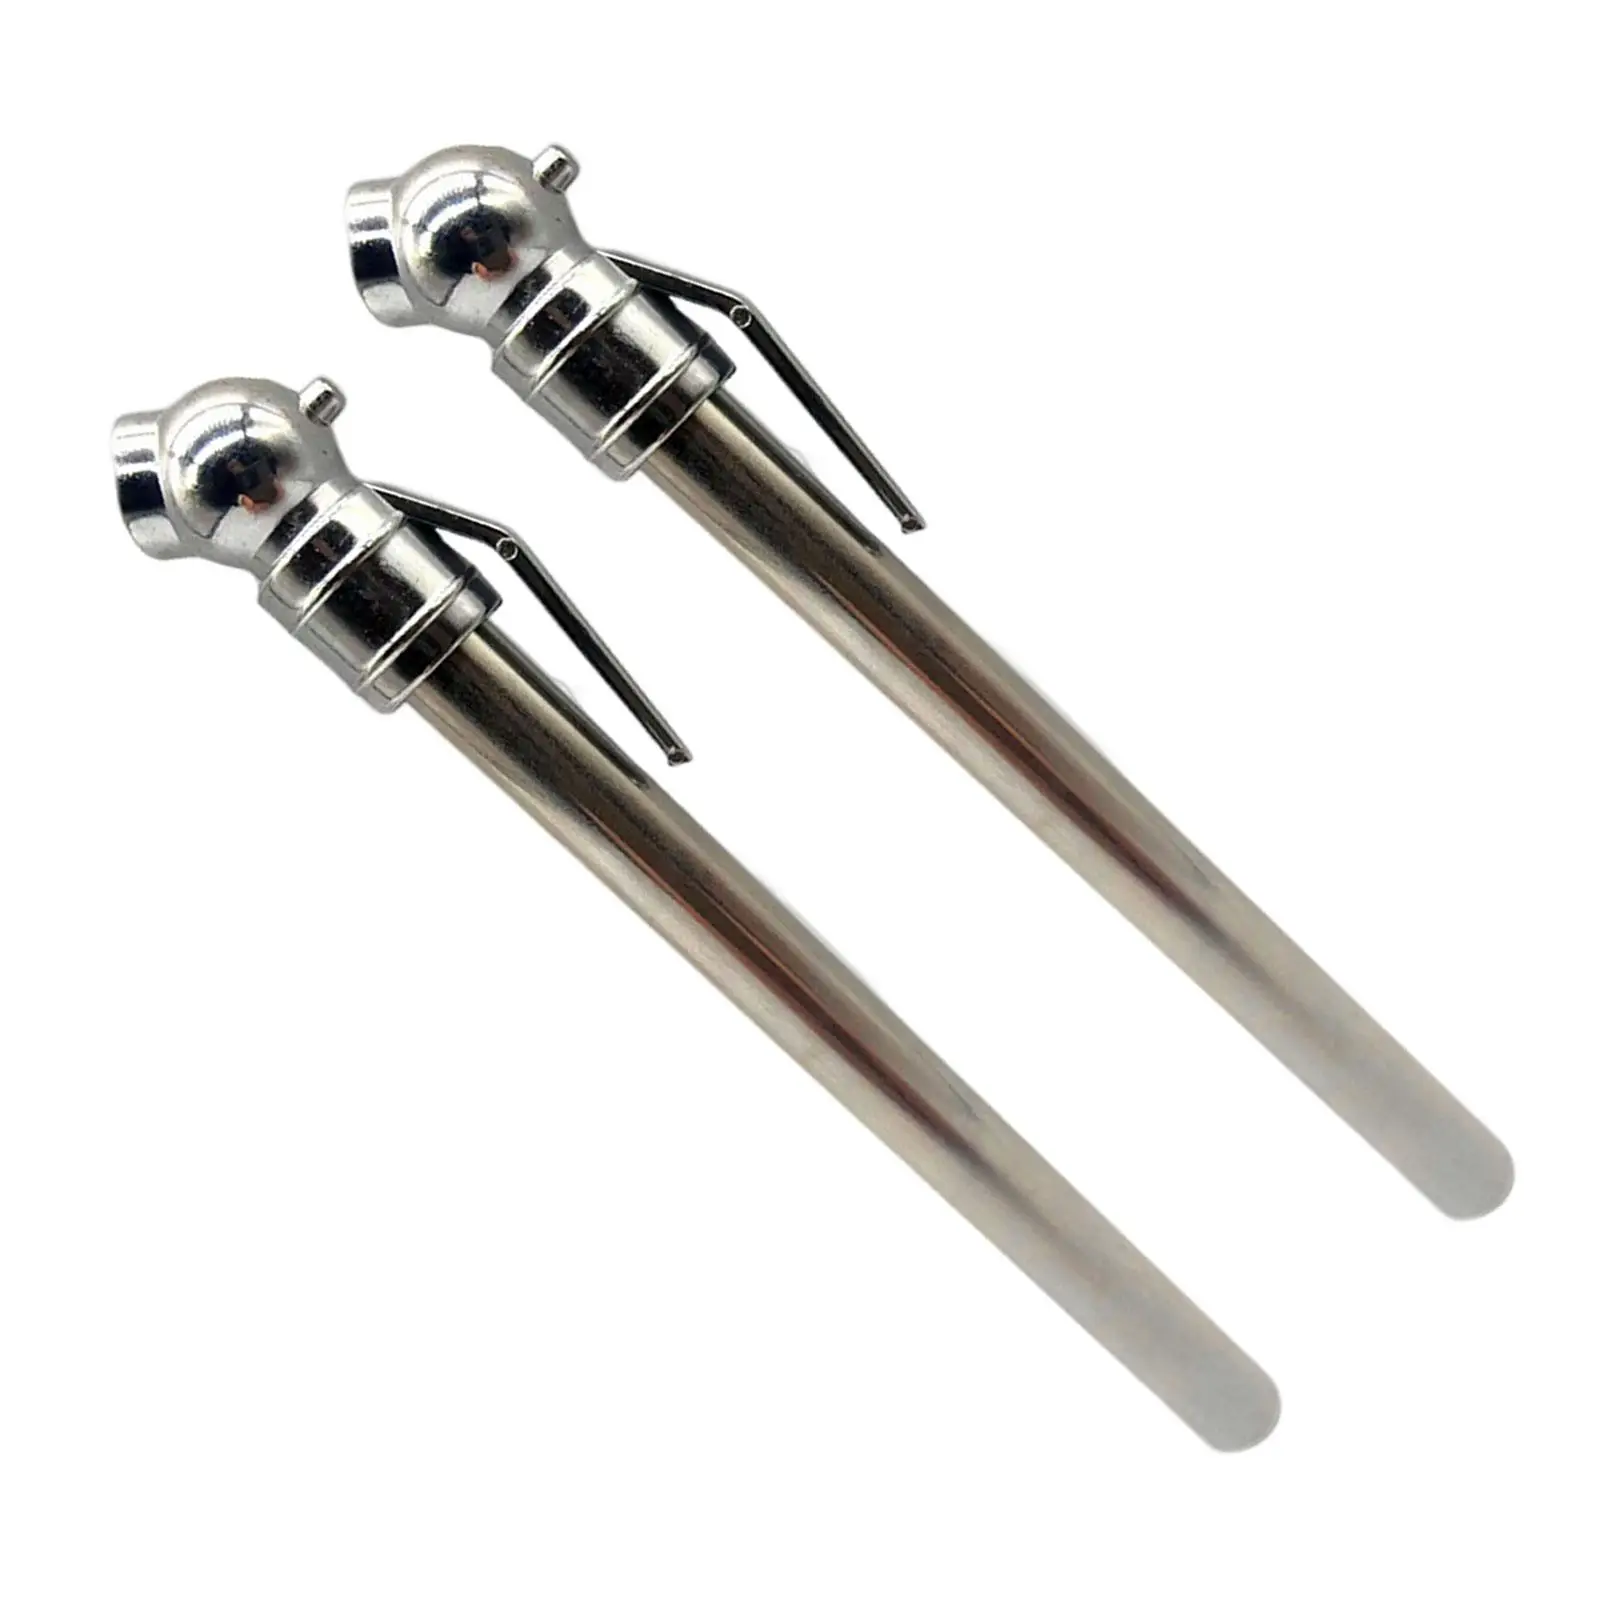 2Pcs Pencil Tire Pressure Gauge Stainless Steel Body for Bicycles Trucks Car